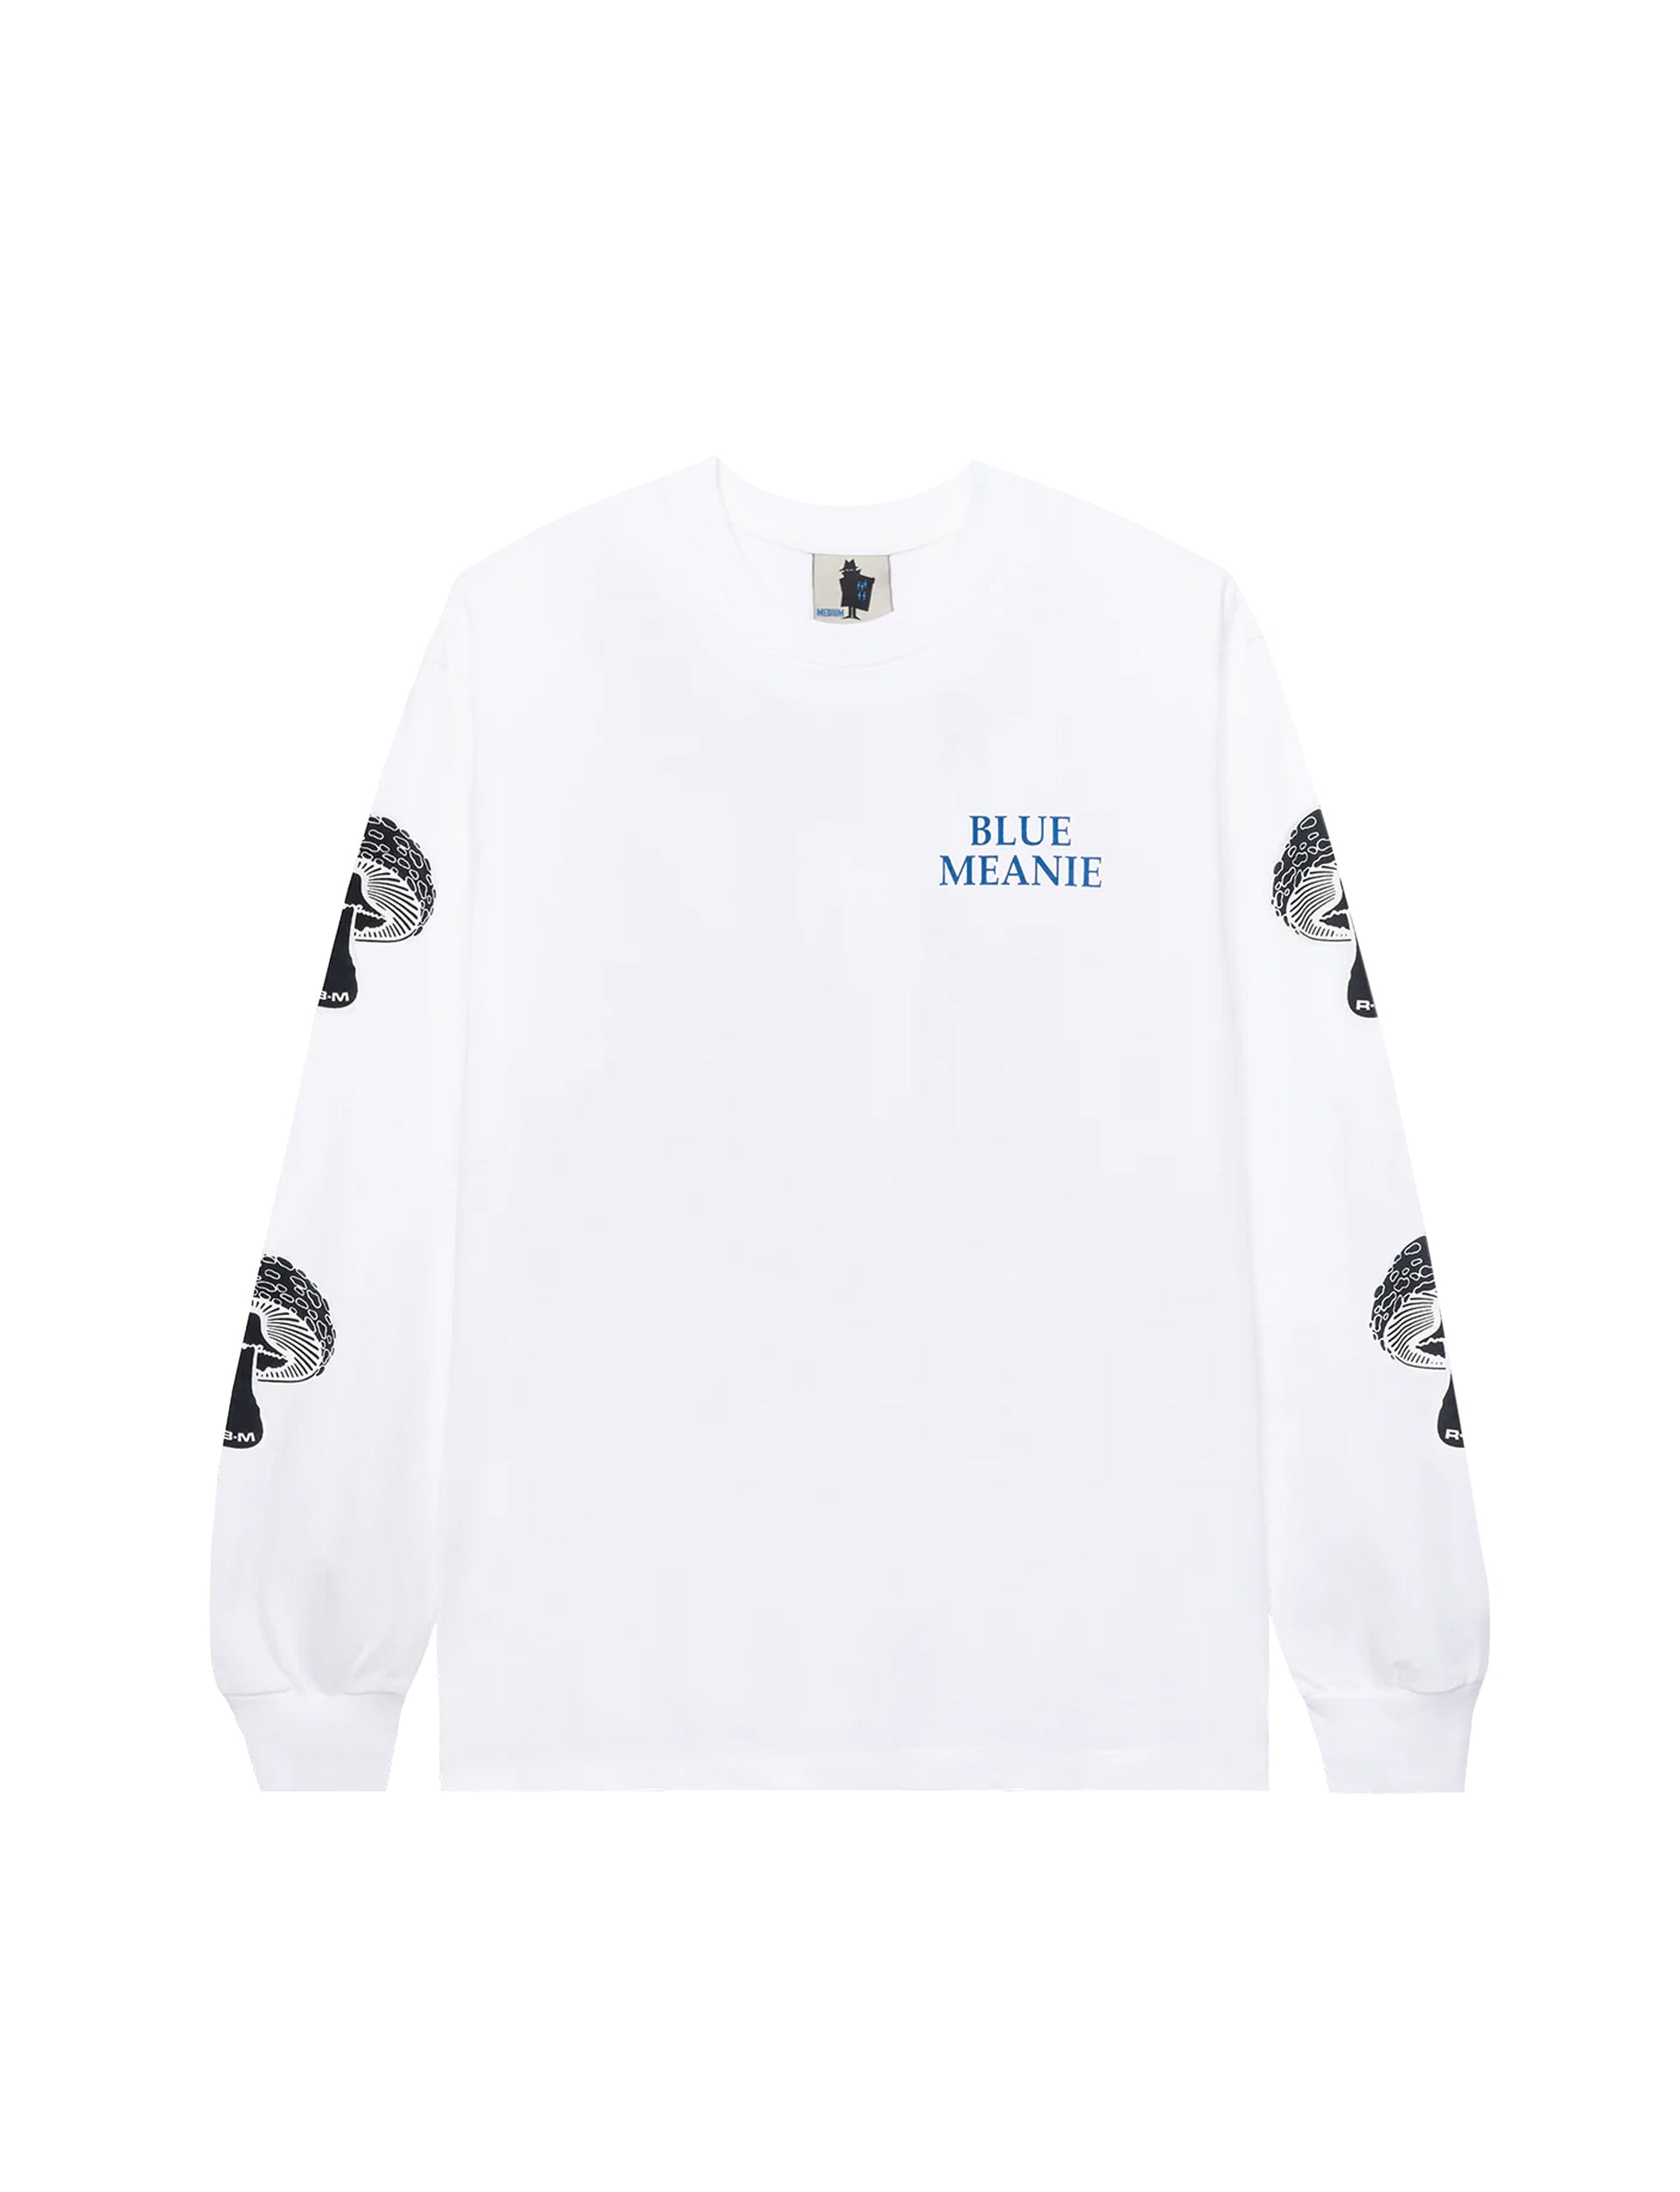 REAL BAD MAN BLUE MEANIE LS TEE WHITE